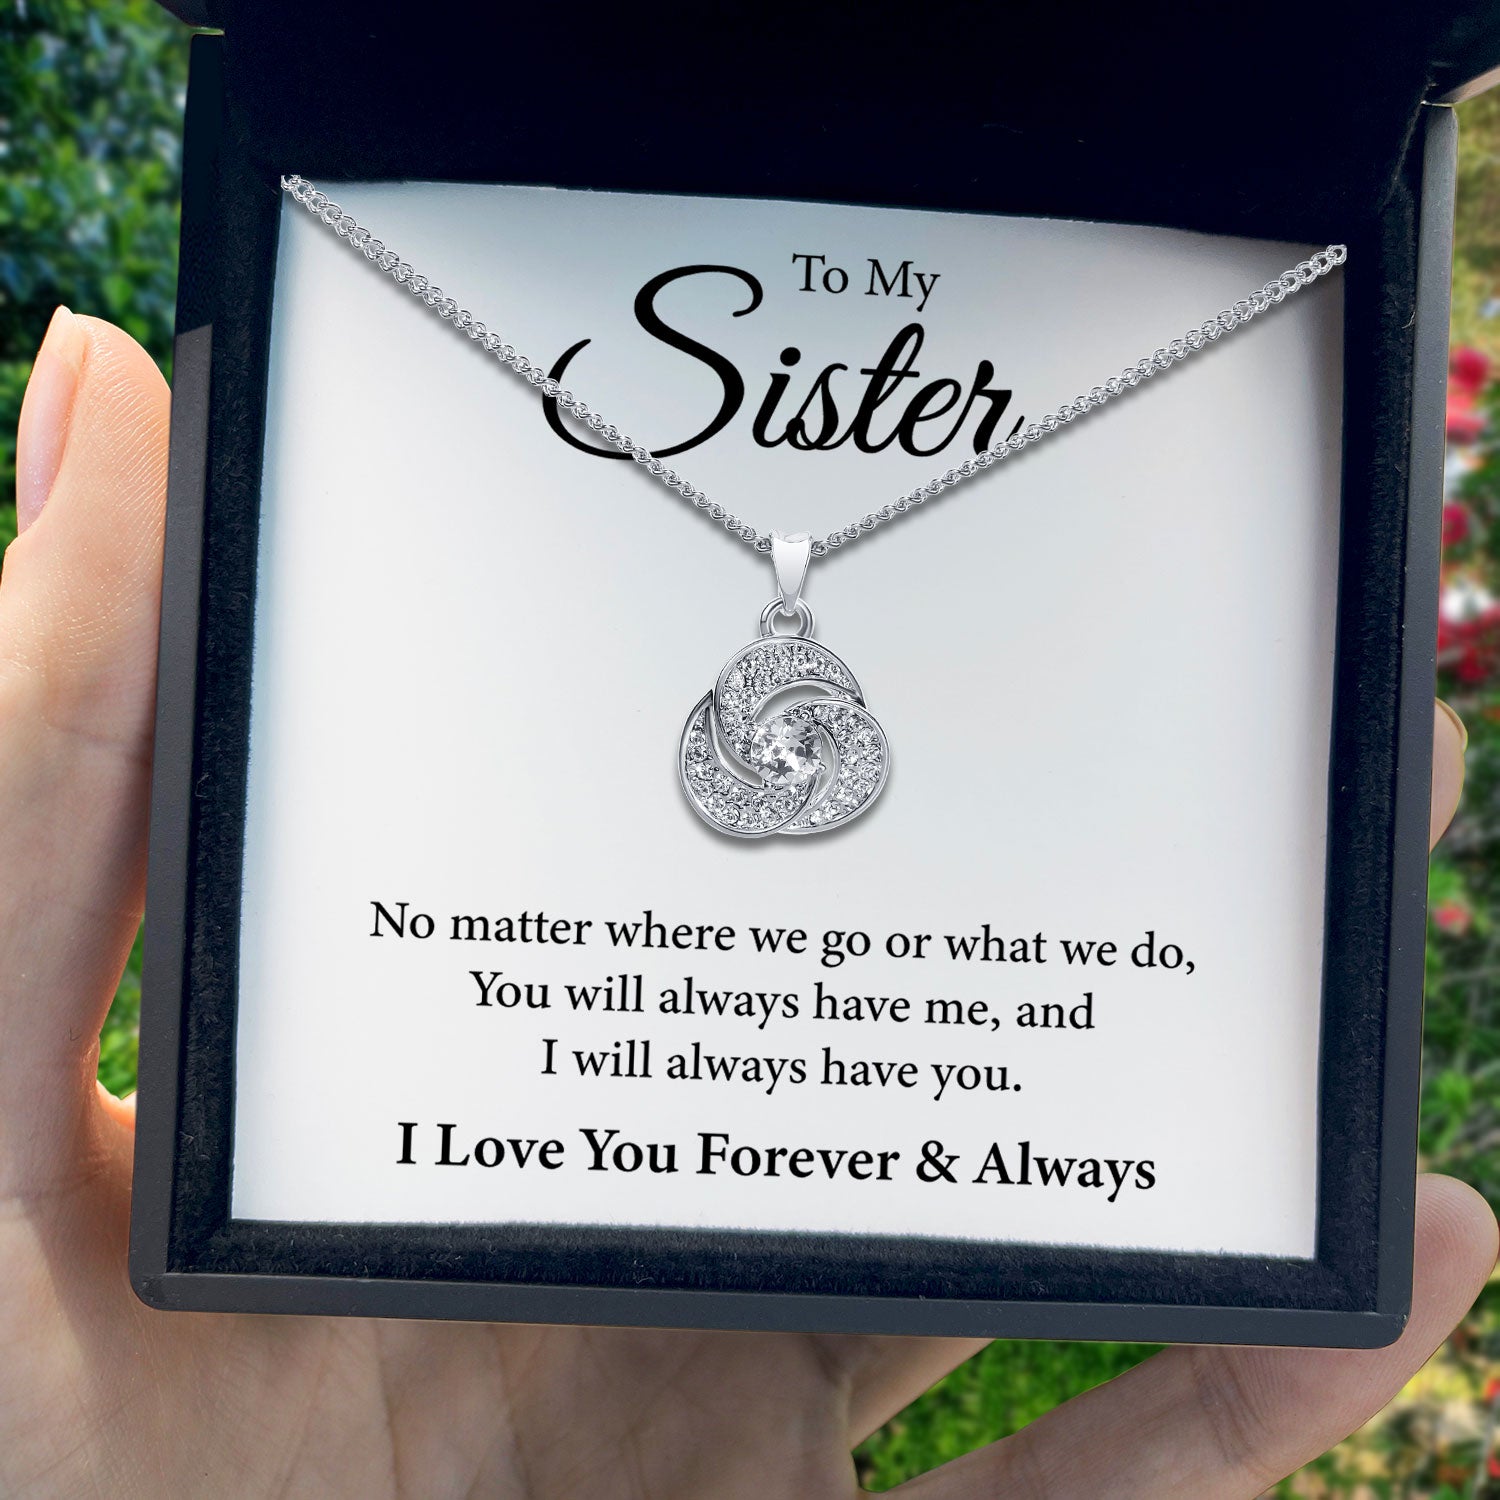 To My Sister - I Love You Forever & Always - Tryndi Love Knot Necklace